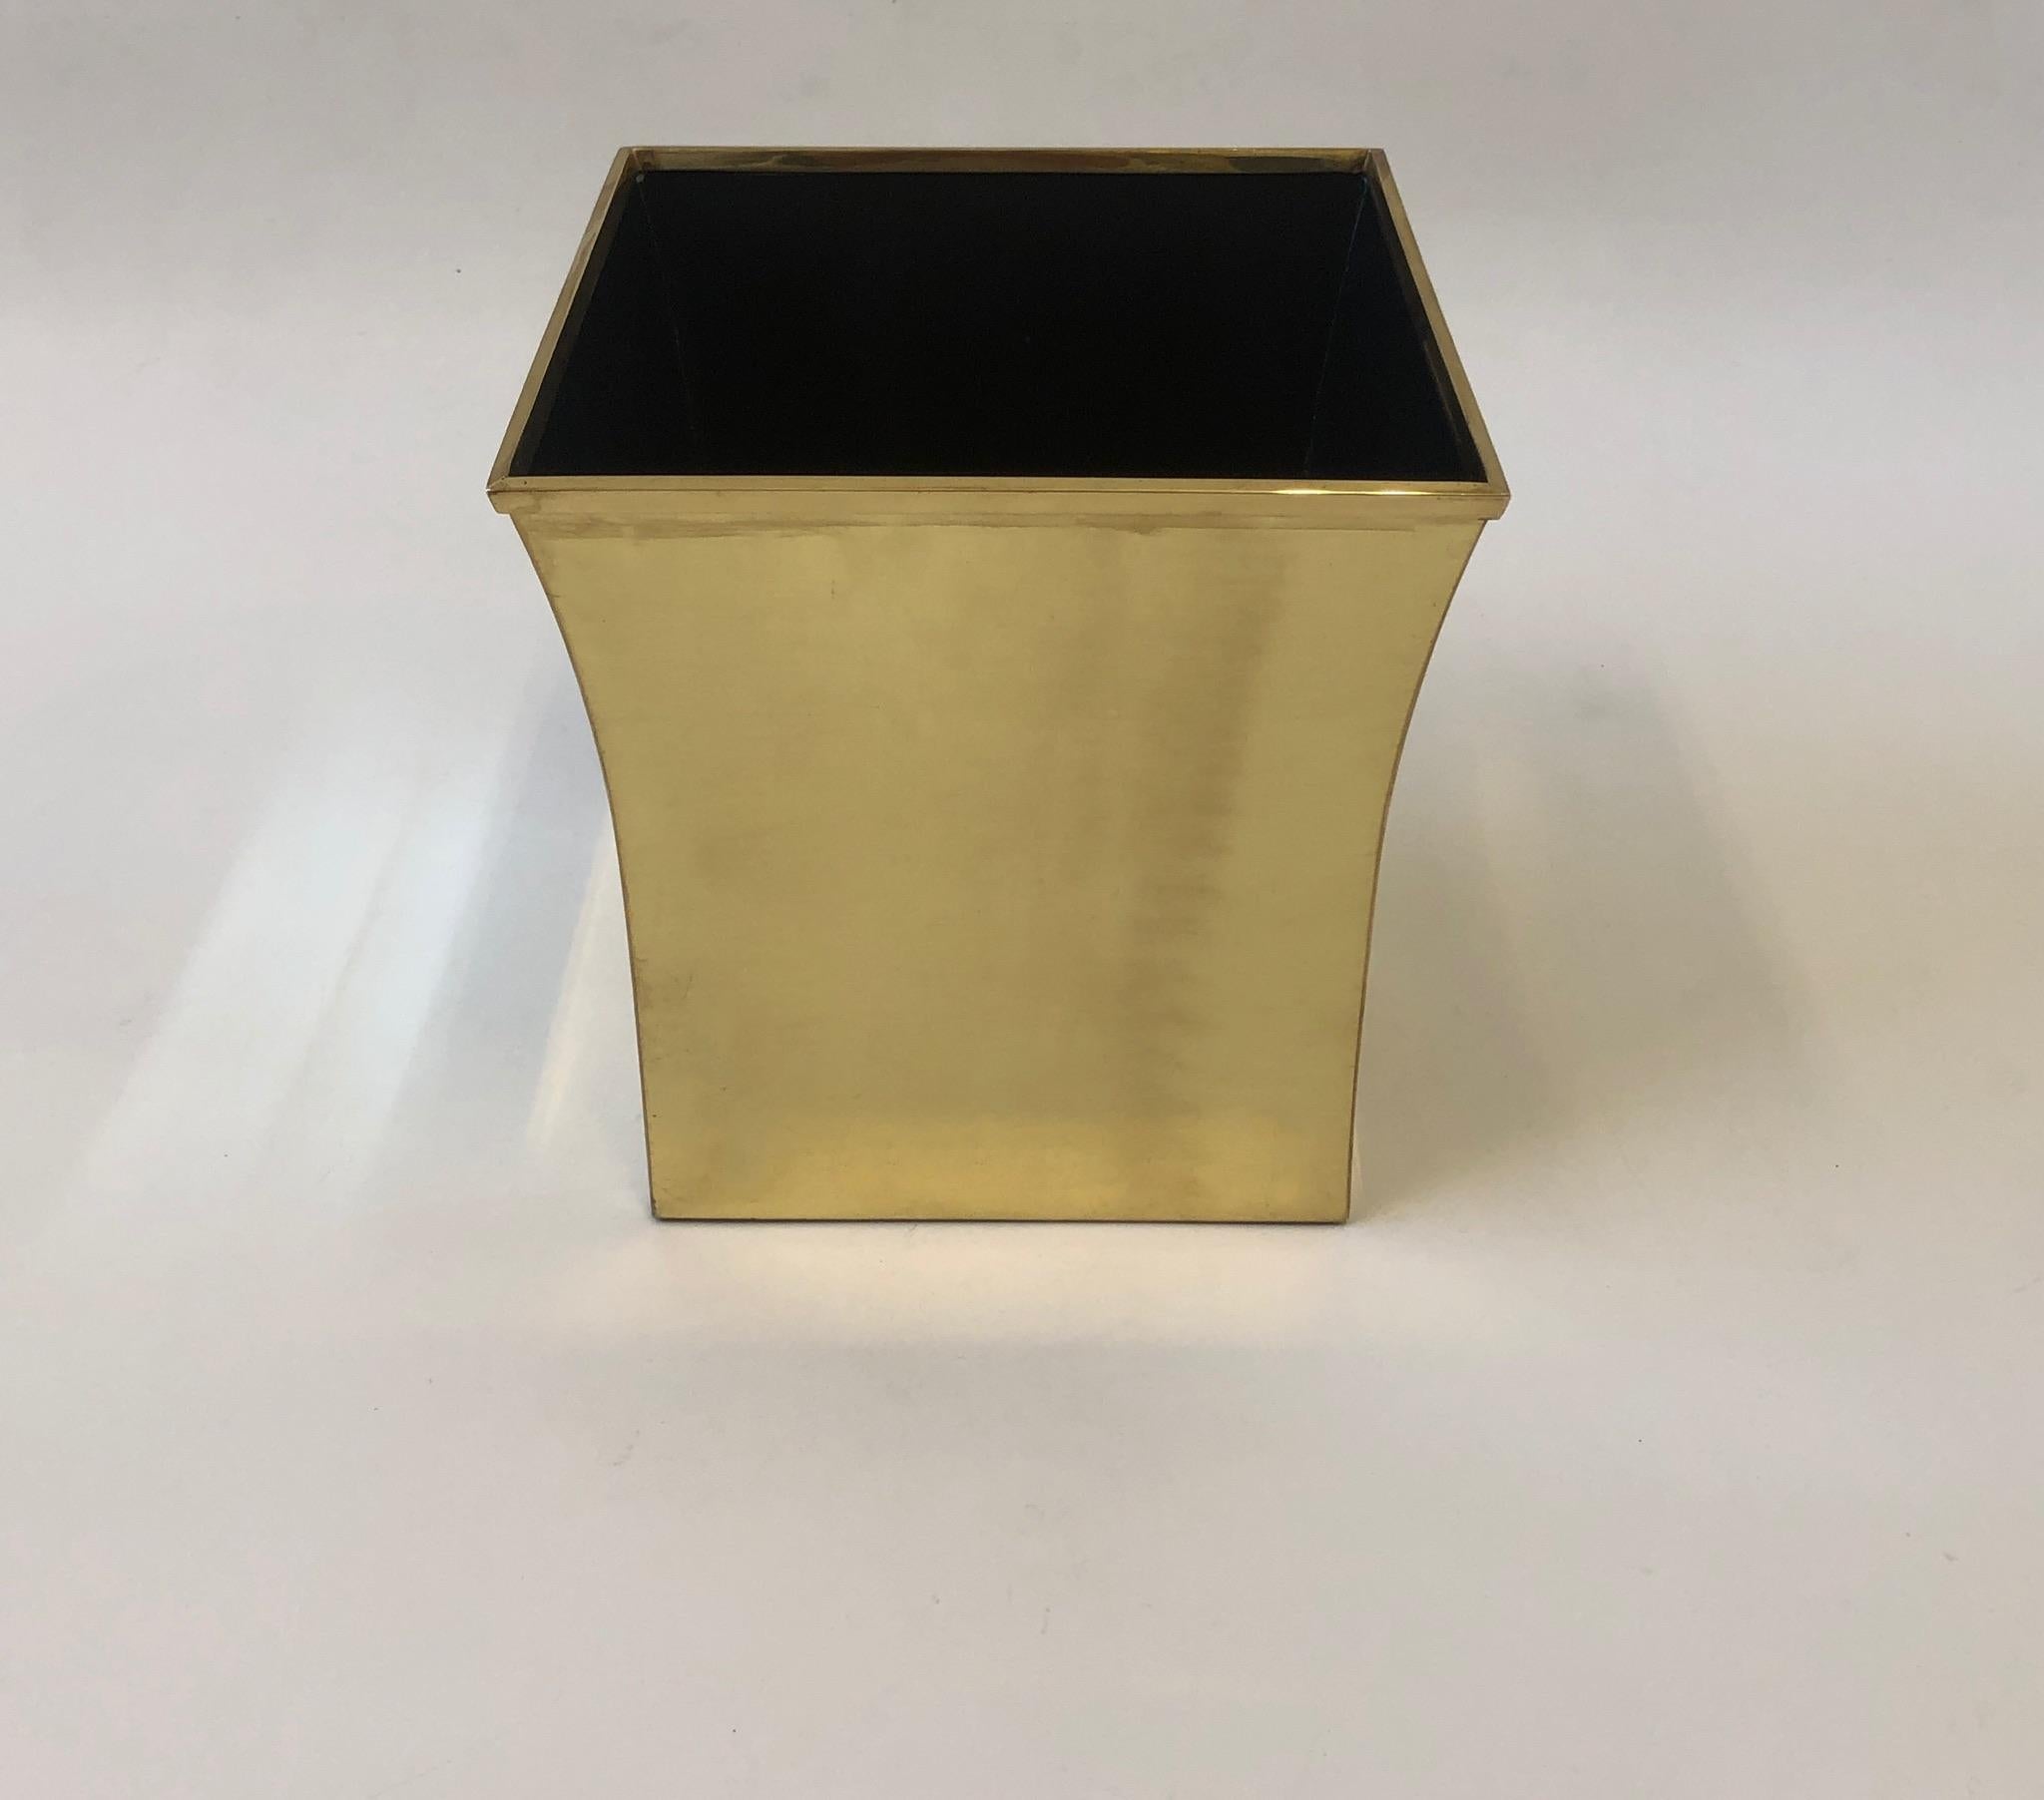 A glamorous 1980s polish brass and black lacquered wastebasket by Karl Springer. Constructed of solid brass with the inside black lacquered. Newly professionally polished and lacquered. Shows minor wear.
Measurements: 11.25” wide, 11.25” deep,